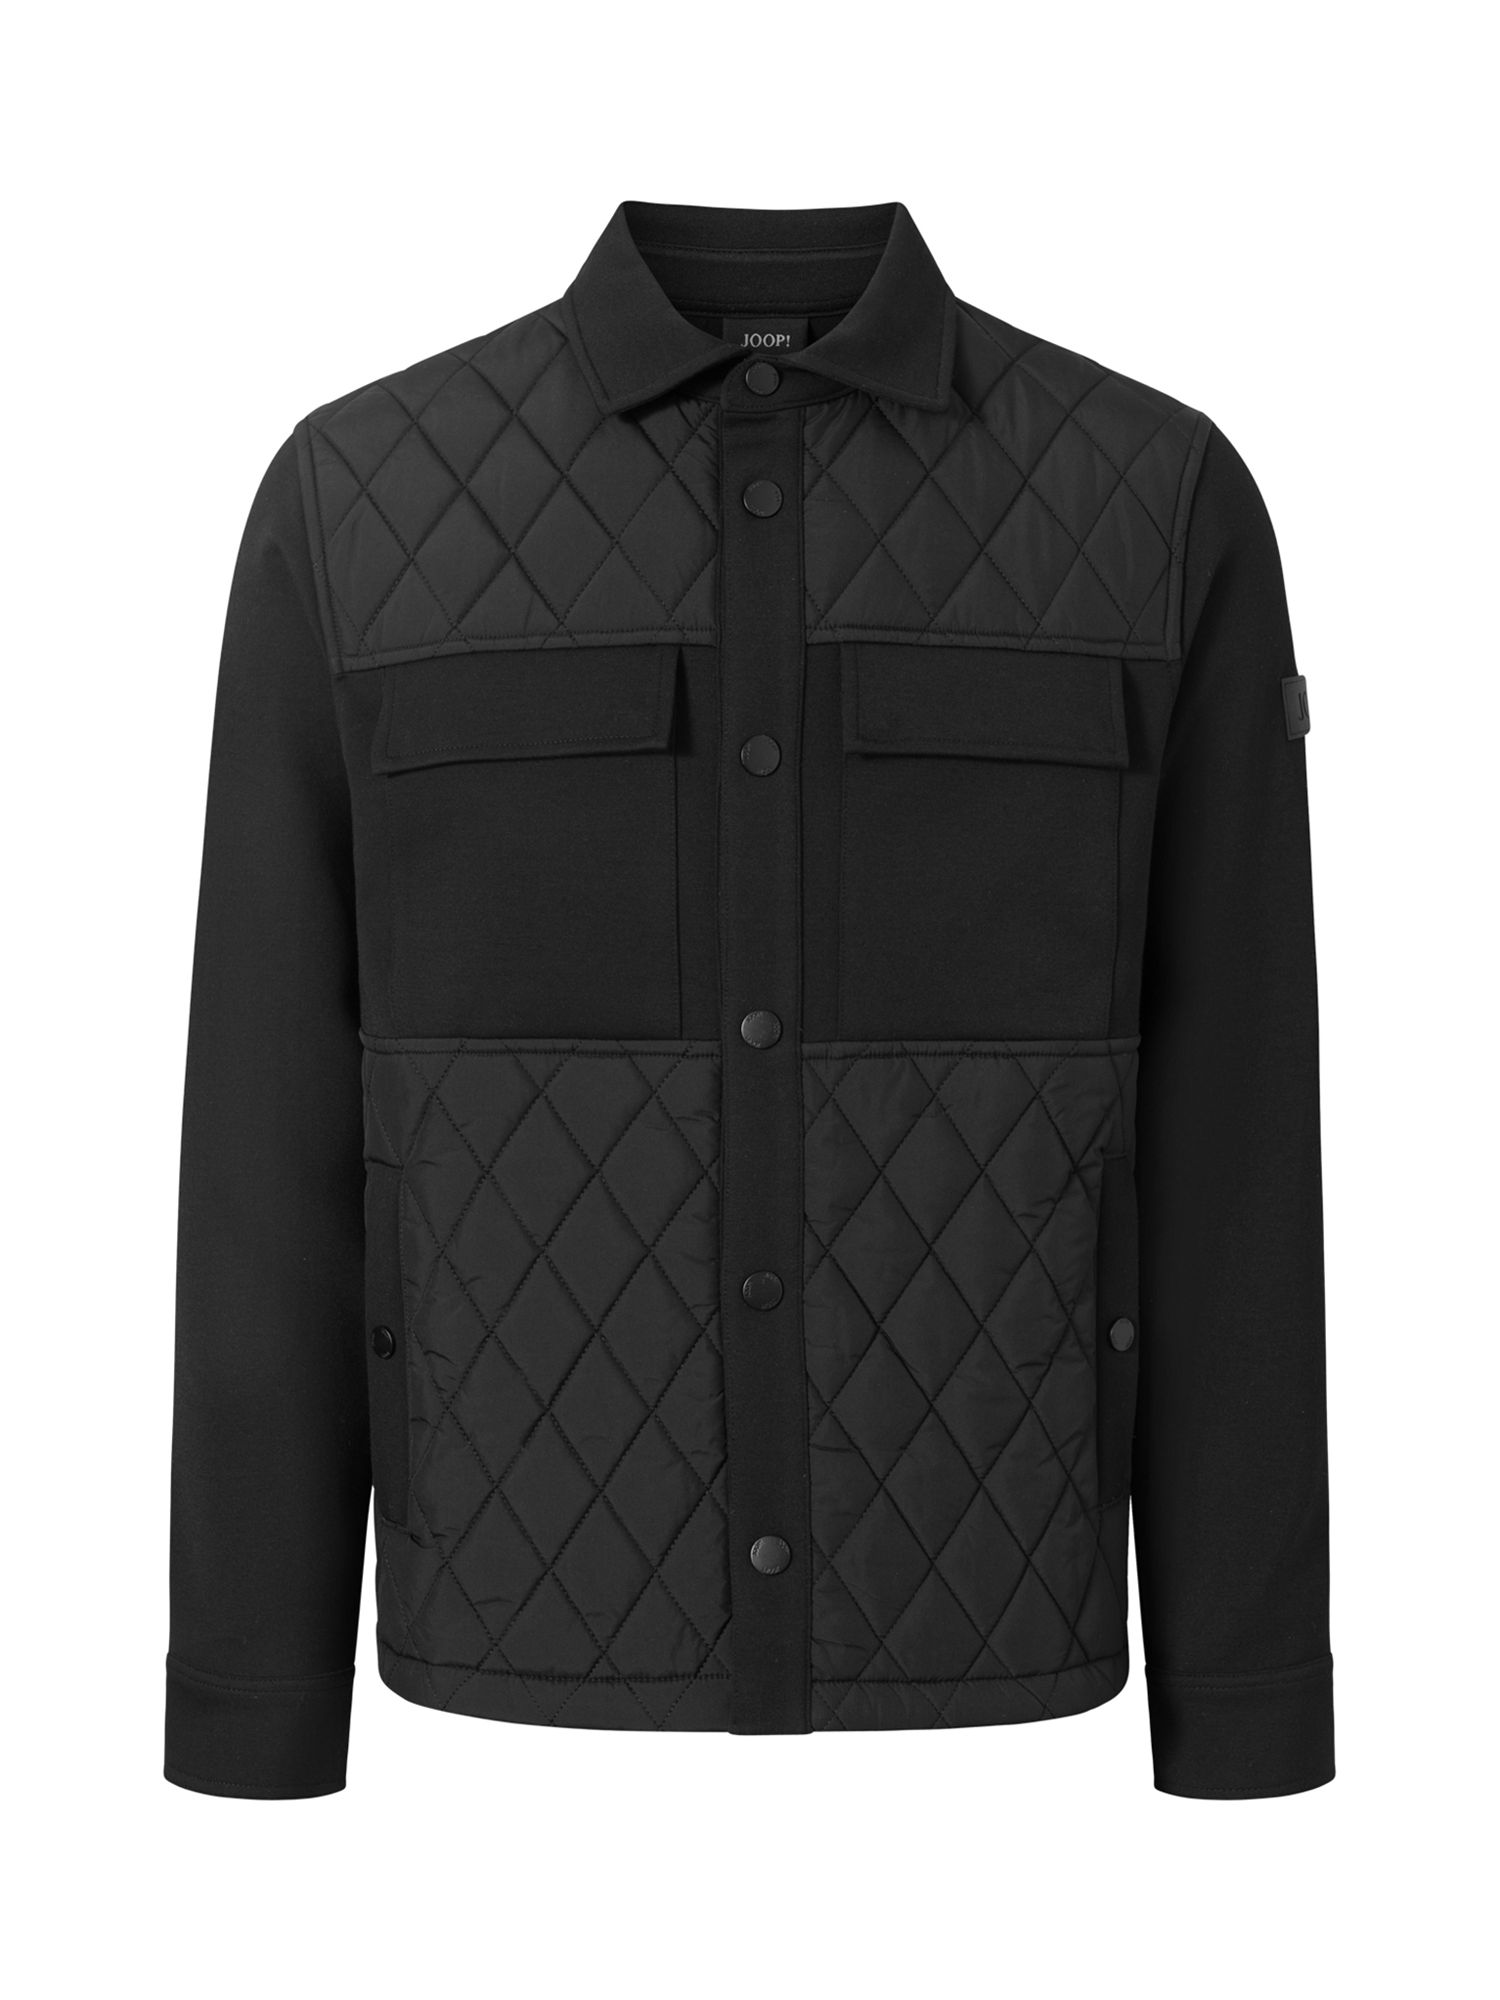 JOOP! Quilted Padded Jersey Jacket, Black at John Lewis & Partners